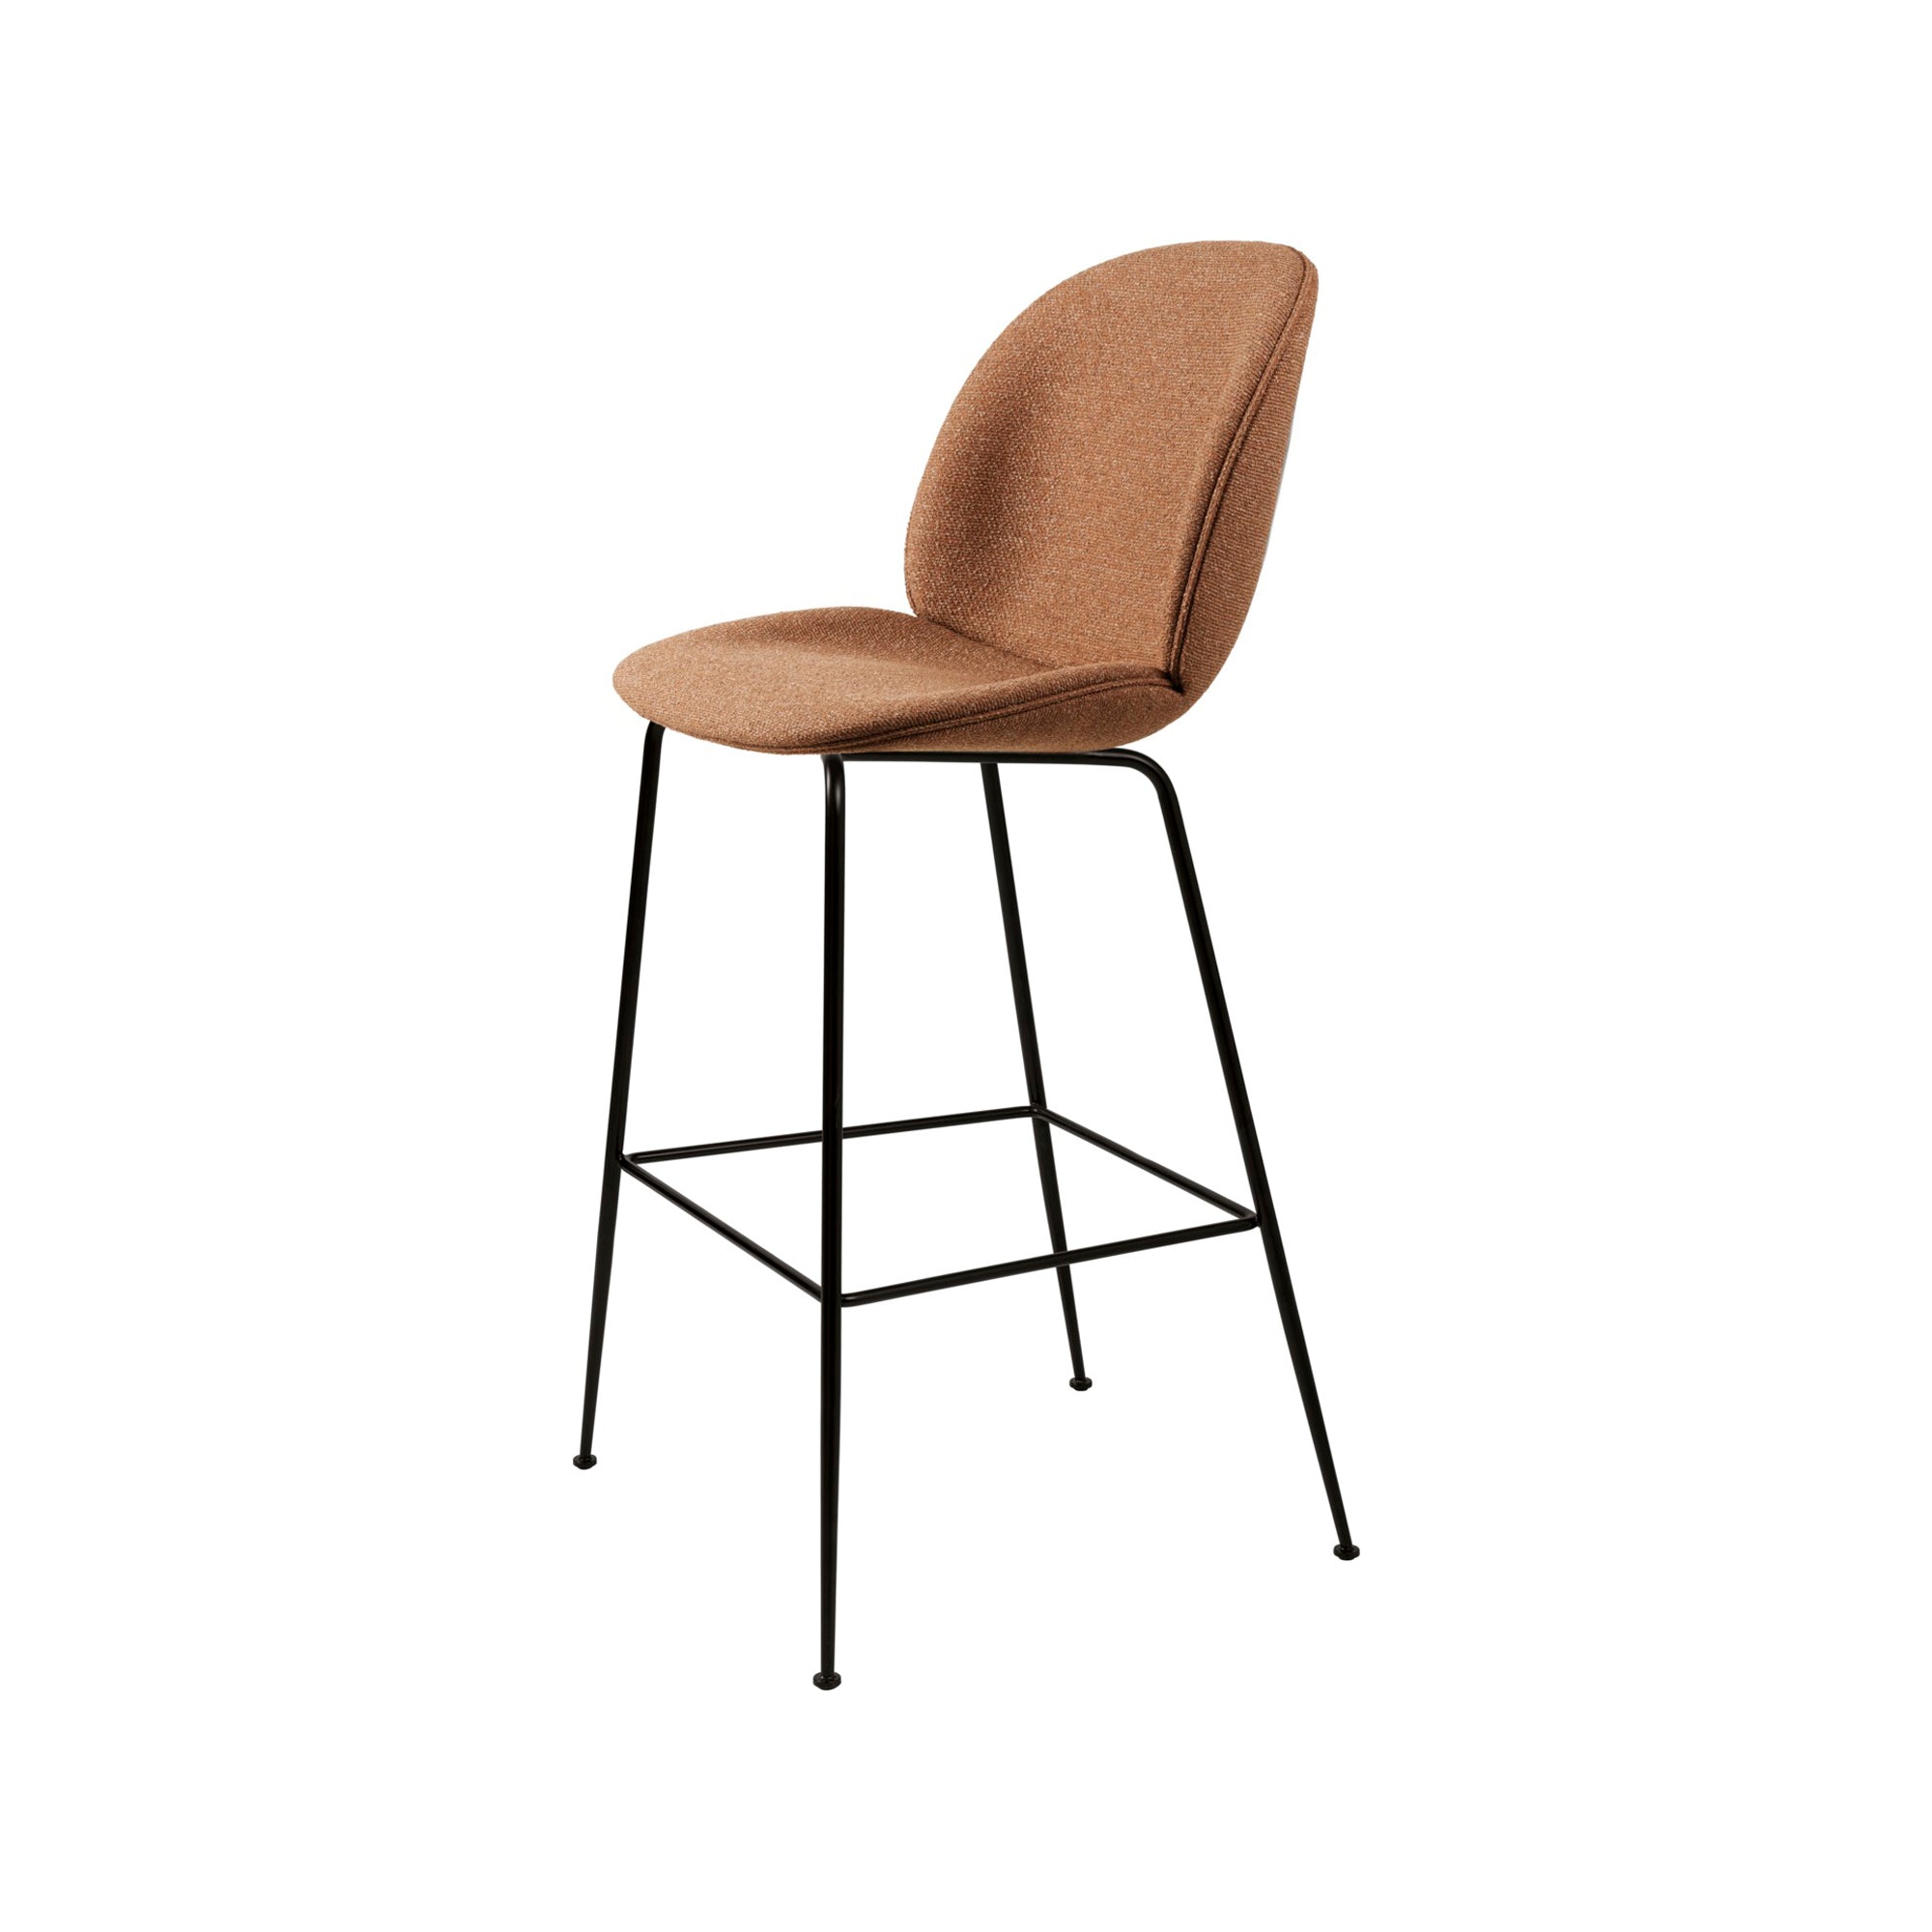 Beetle Bar Chair - Fully Upholstered